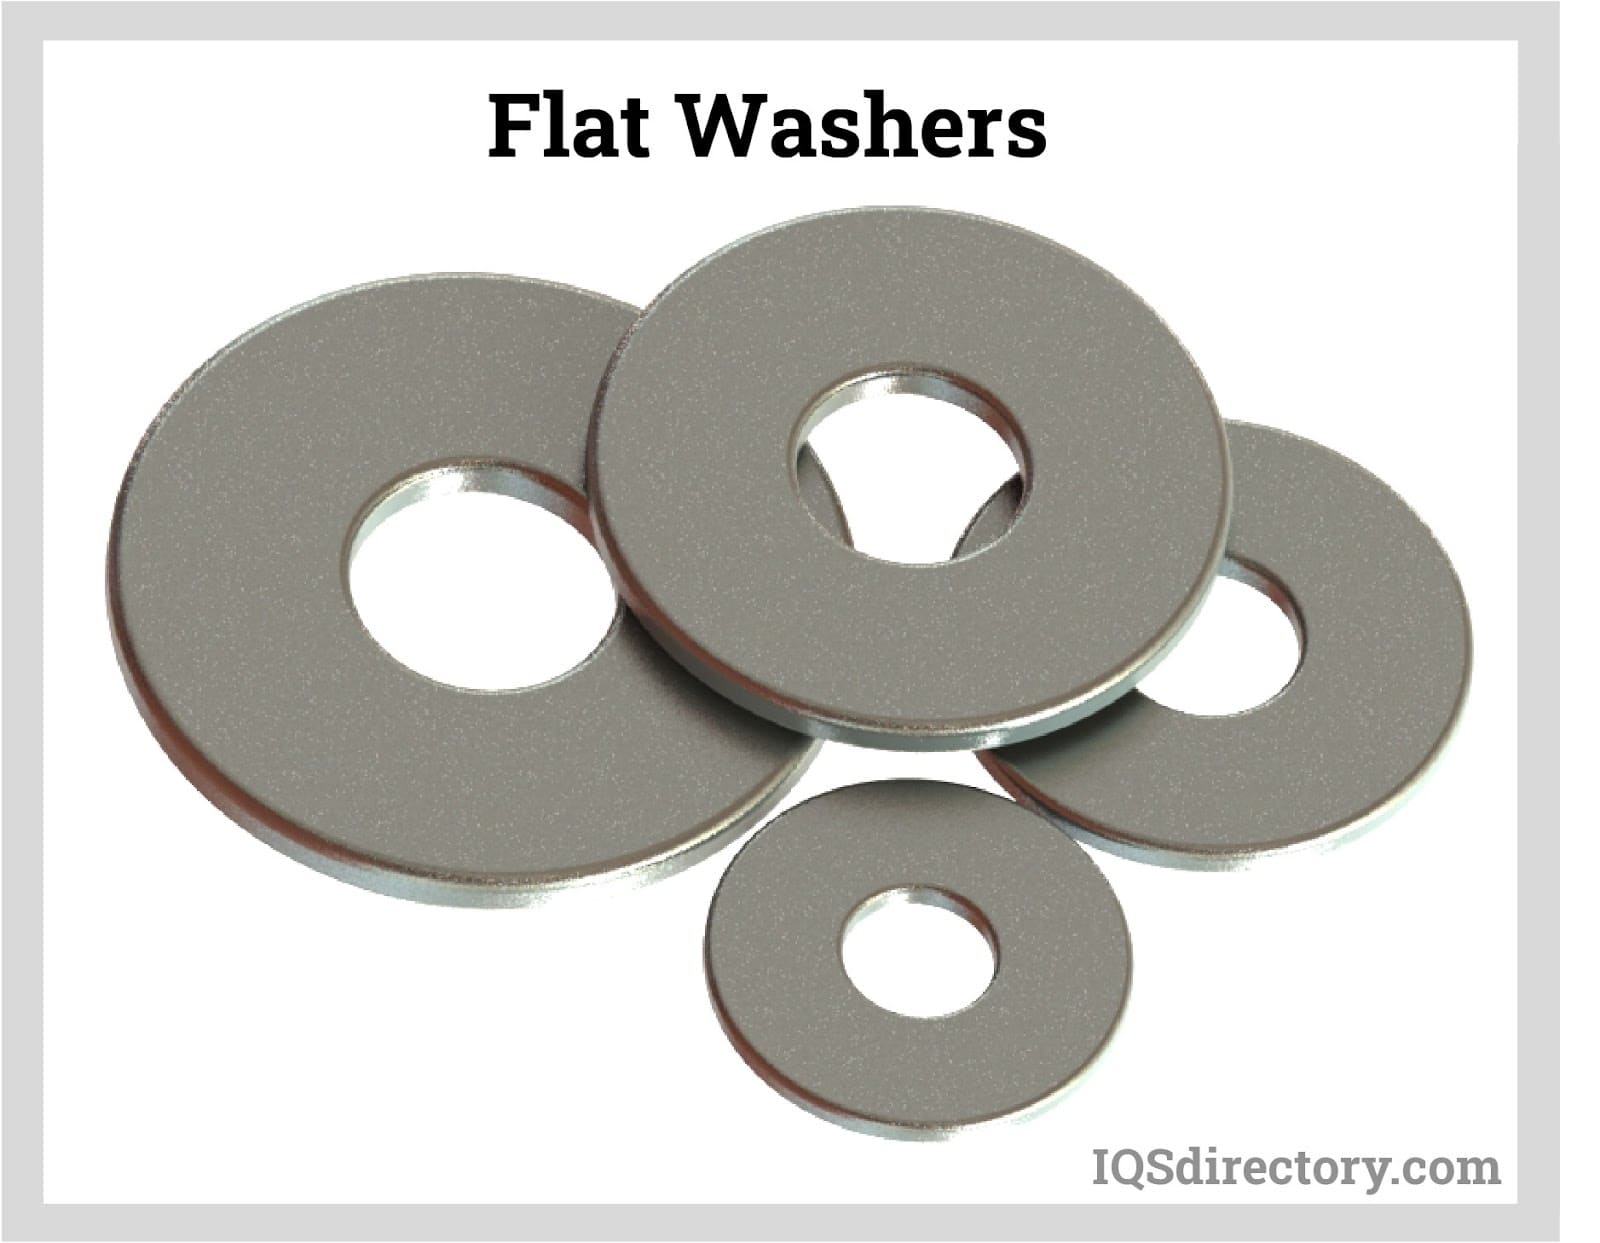 Metal Washers: Types, Uses, Features and Benefits